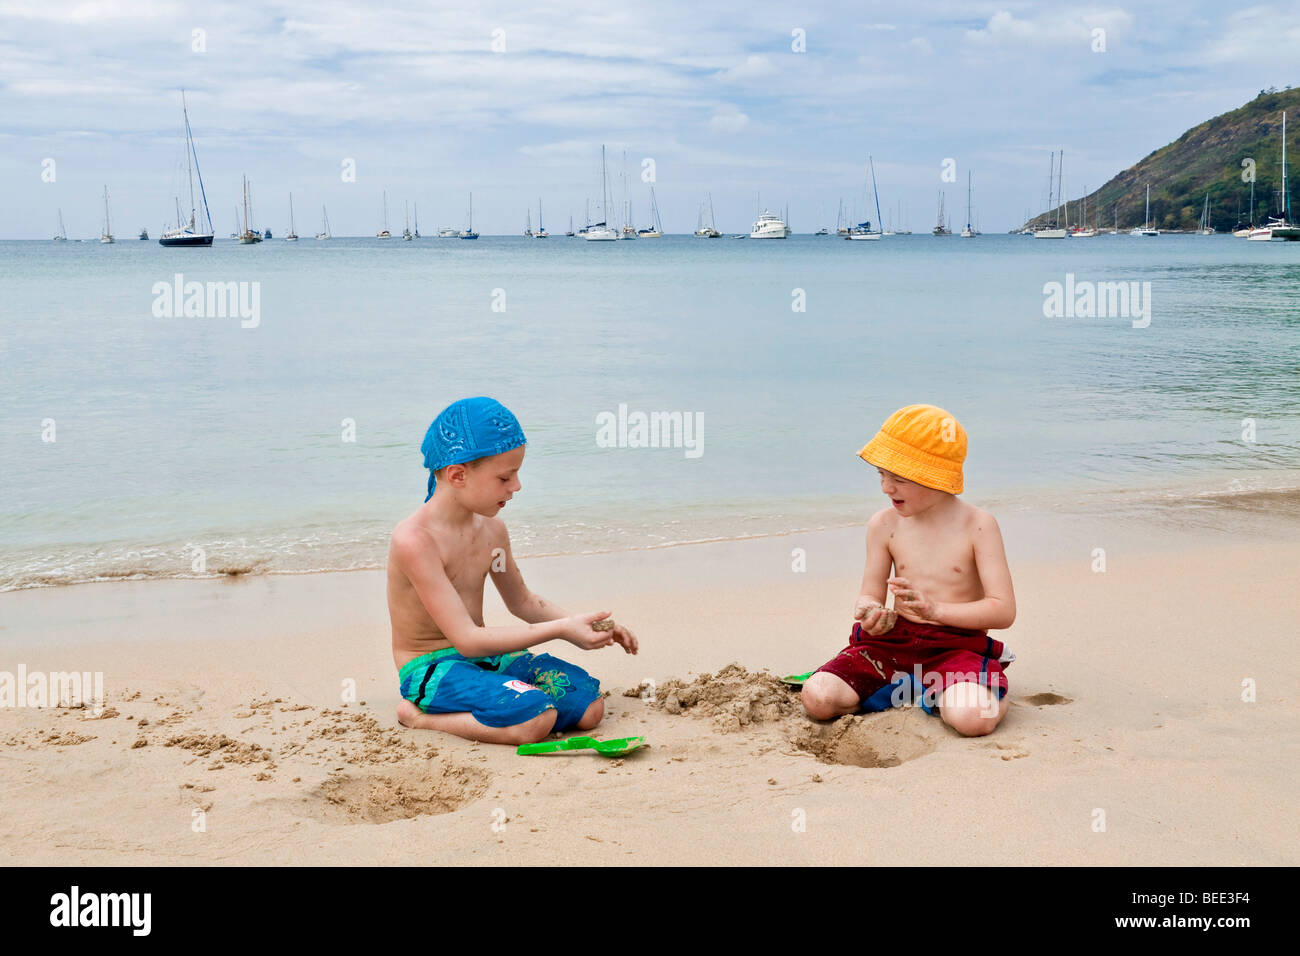 Two boys 5 and 6 years old playing on the beach Nai Harn Beach Phuket Island Southern Thailand Southeast Asia Stock Photo